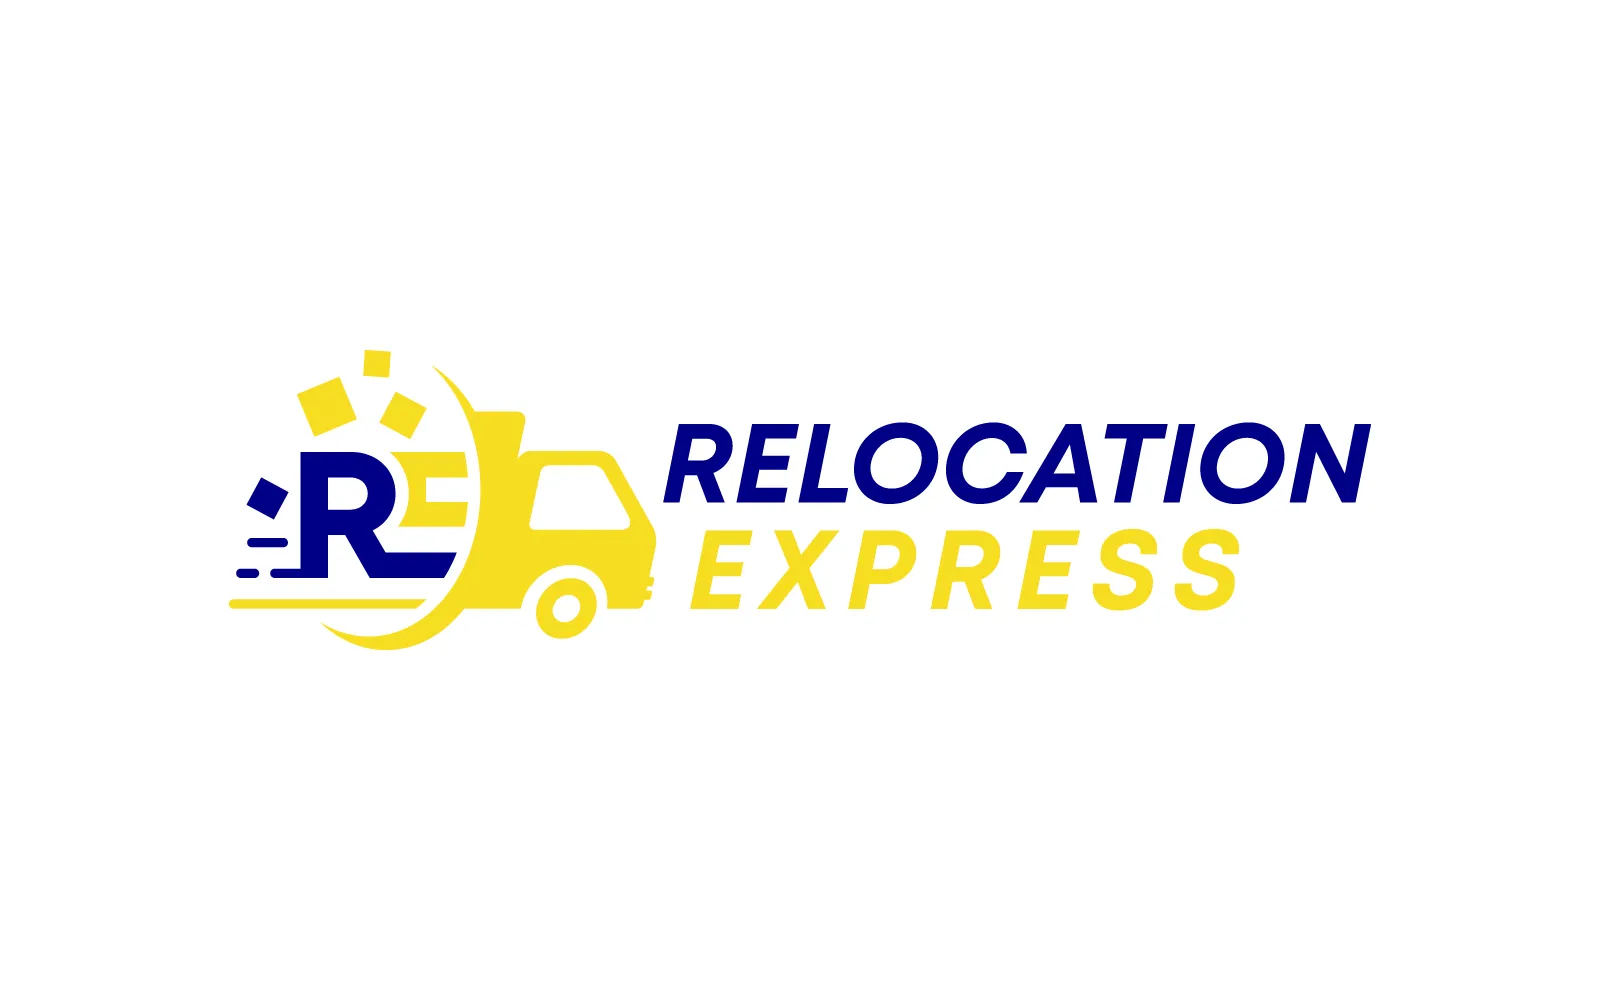 RELOCATION EXPRESS